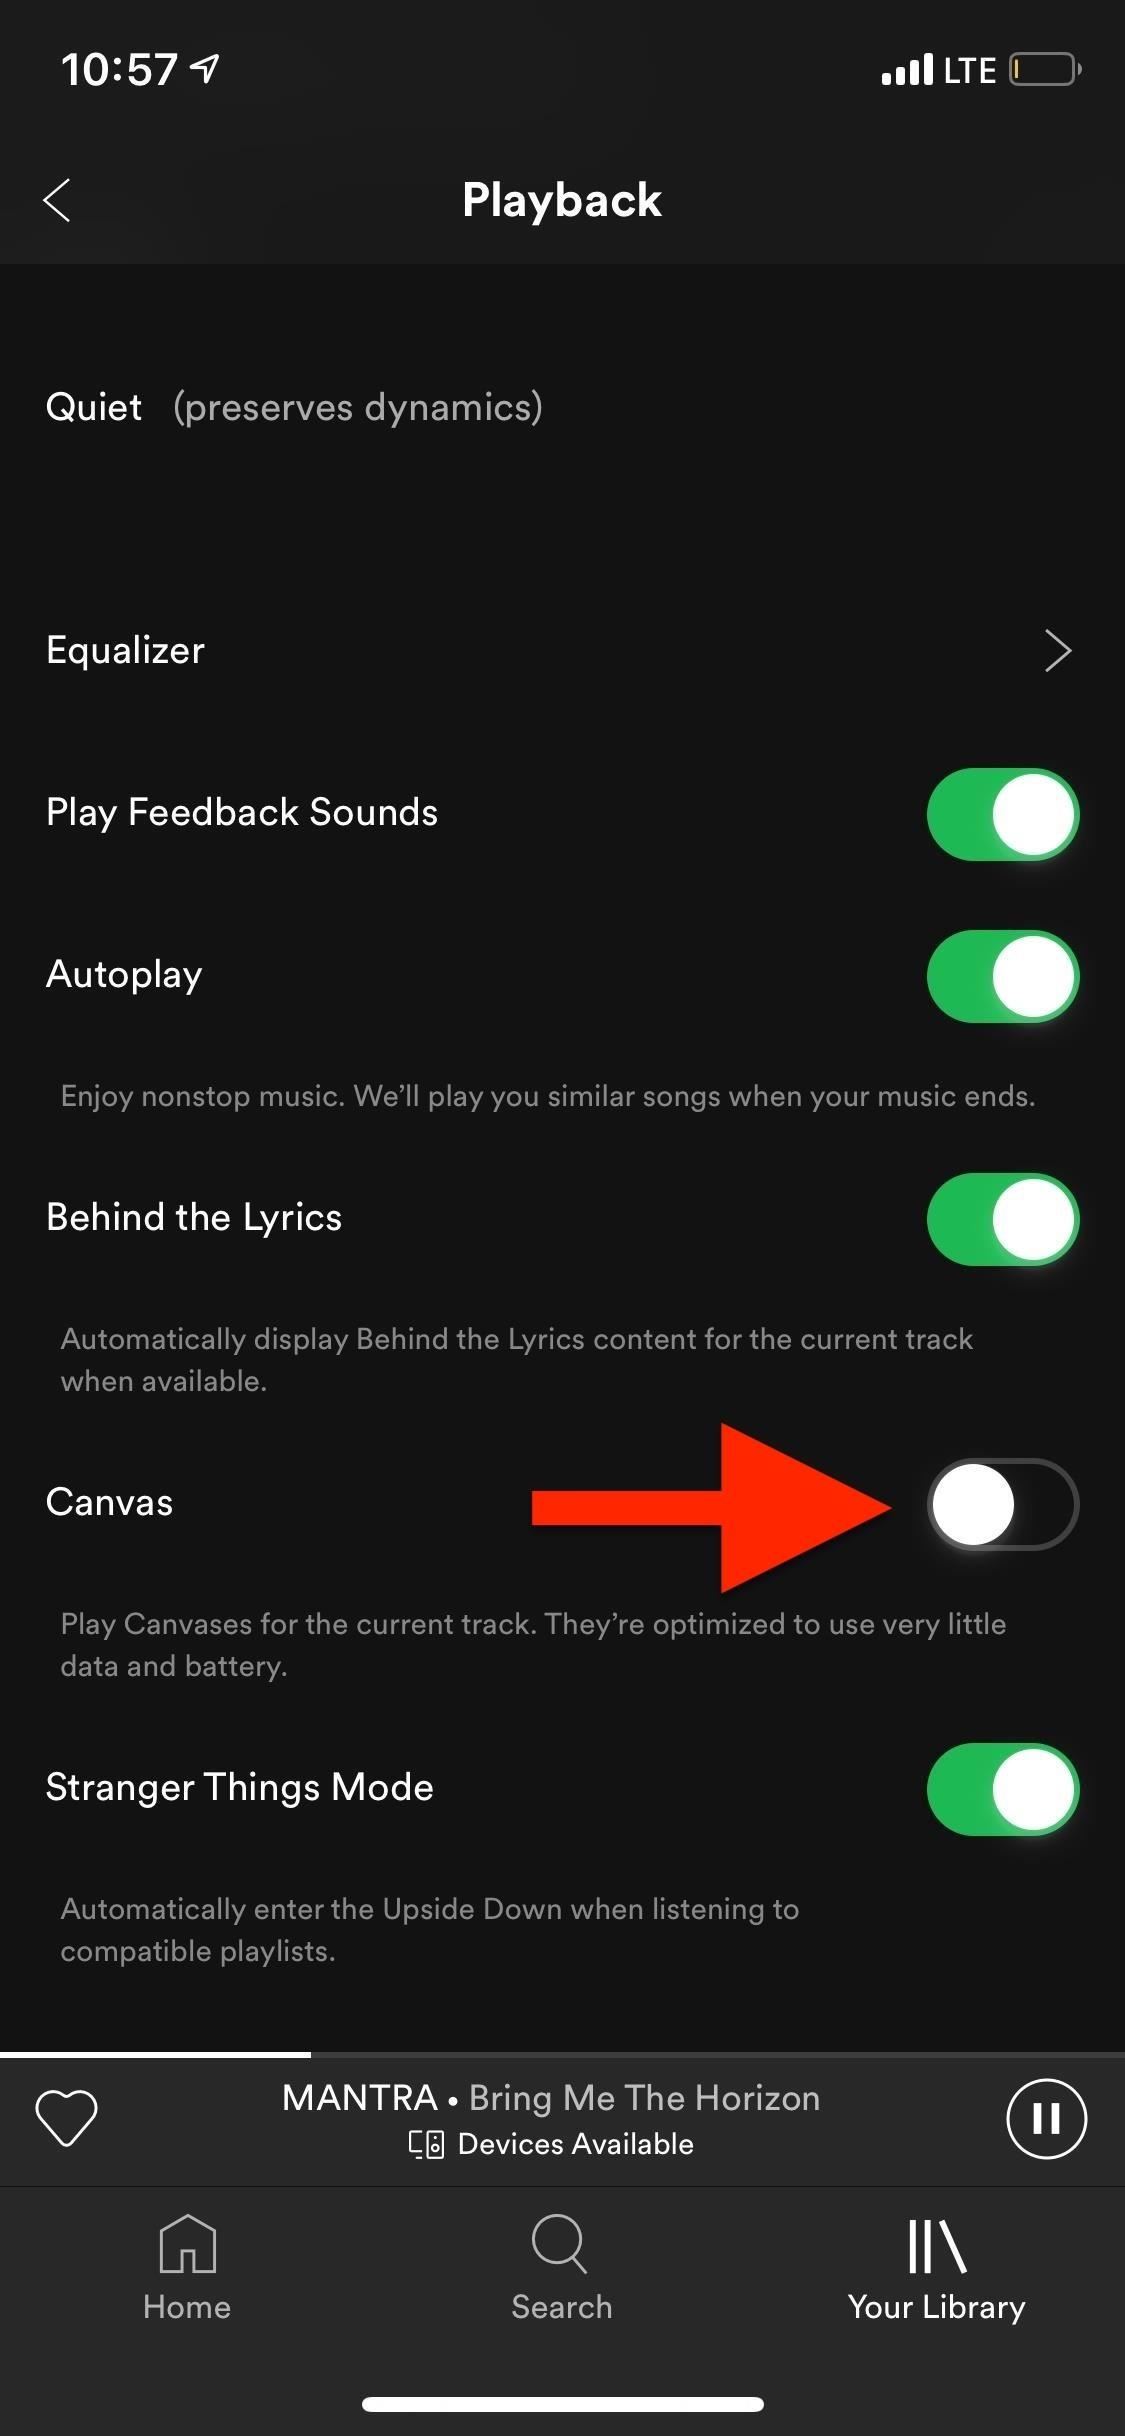 How to Disable Those Annoying Looping Videos When Playing Songs on Spotify